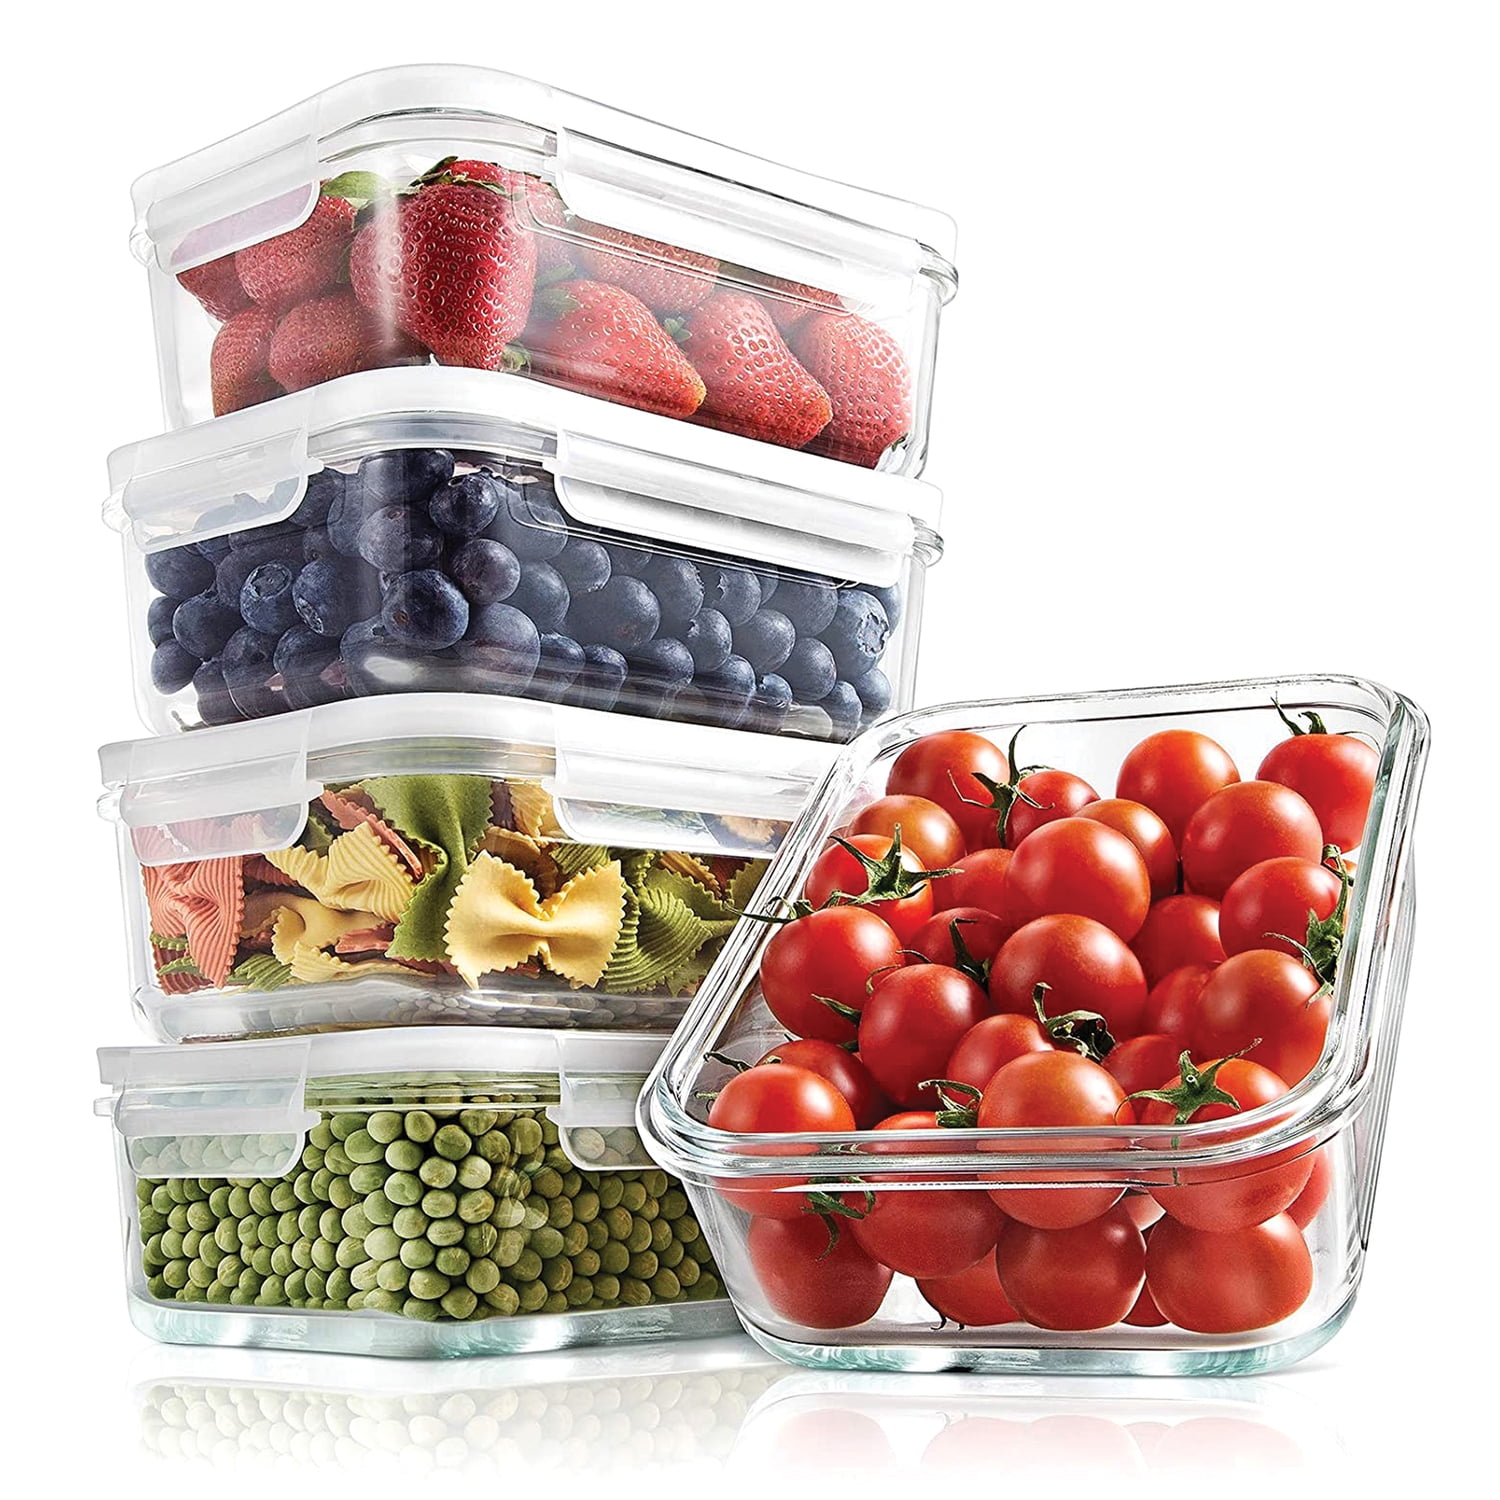 Nutrichef 5-piece Superior Glass Food Storage Containers Set